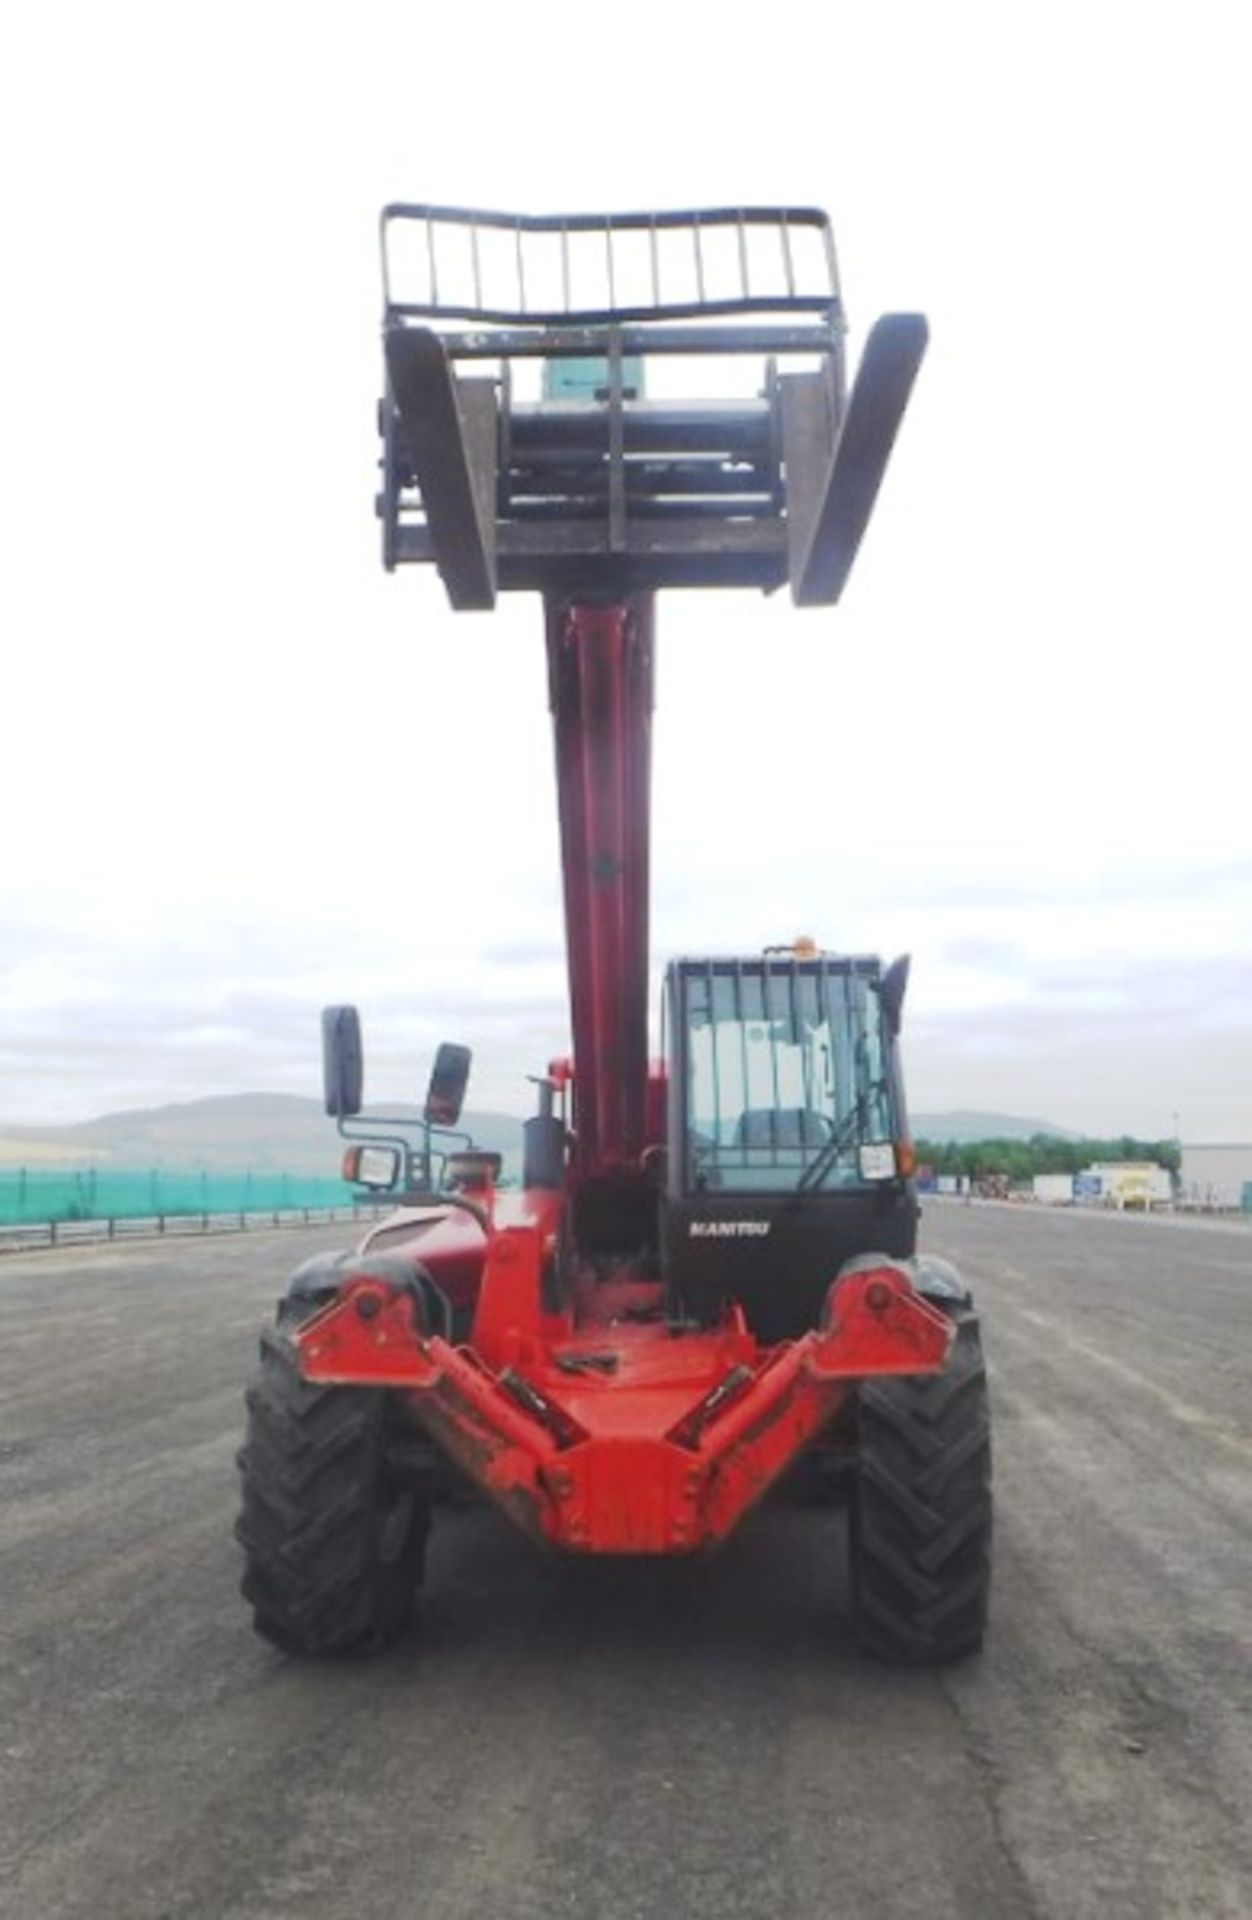 2006 MANITOU 14/35 TELEHANDLER c/w bucket & forks s/n 1230044 Reg no SP06 AXX 2646hrs (not verified) - Image 13 of 16